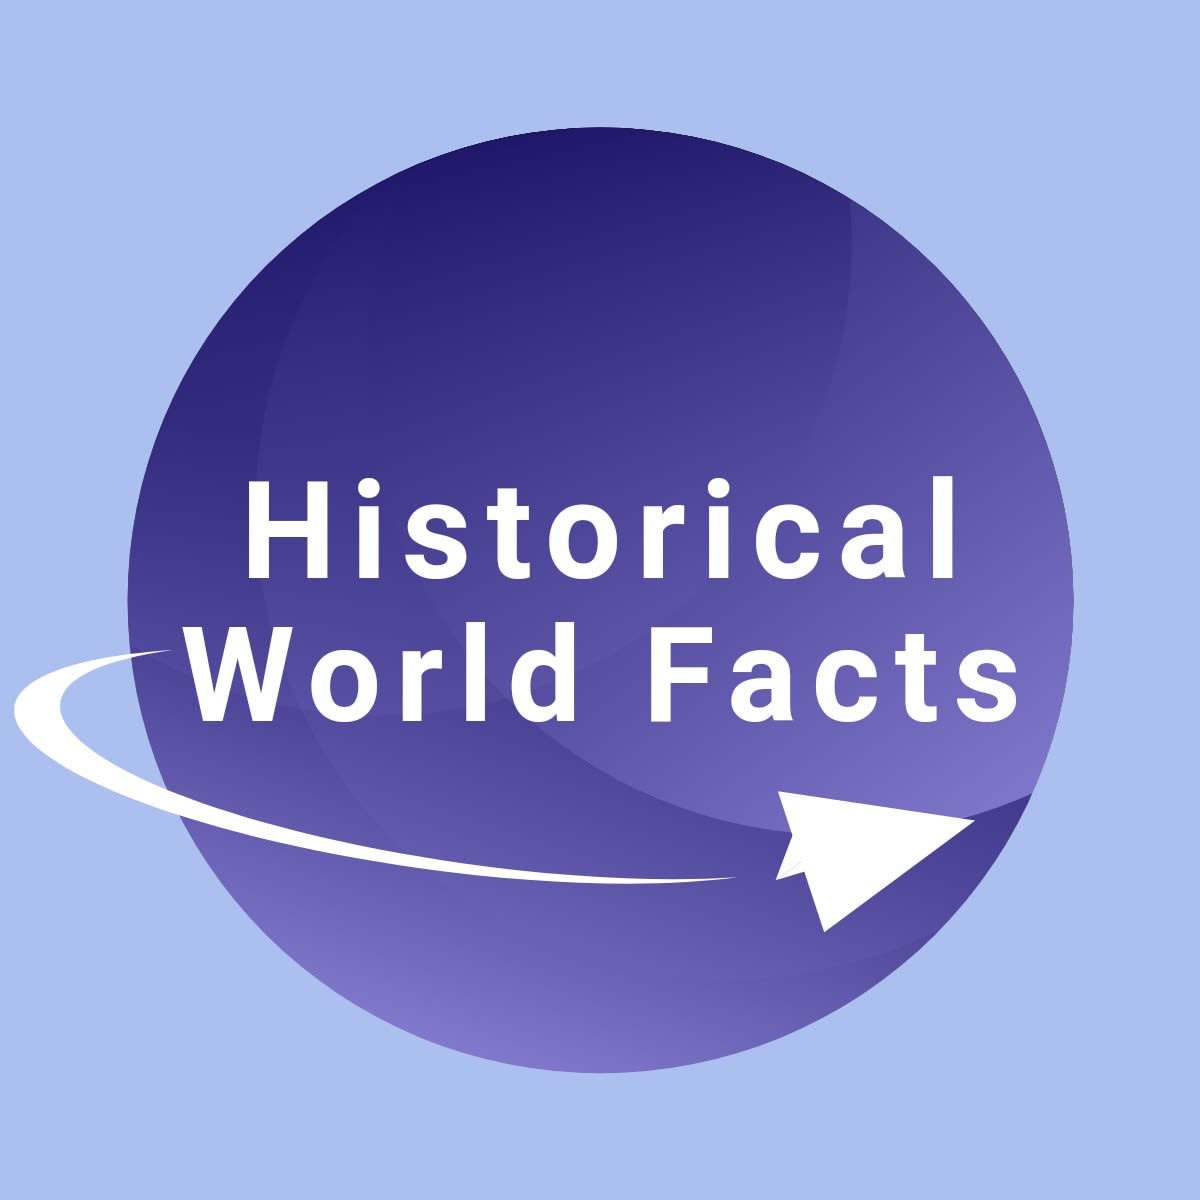 Historical World Facts